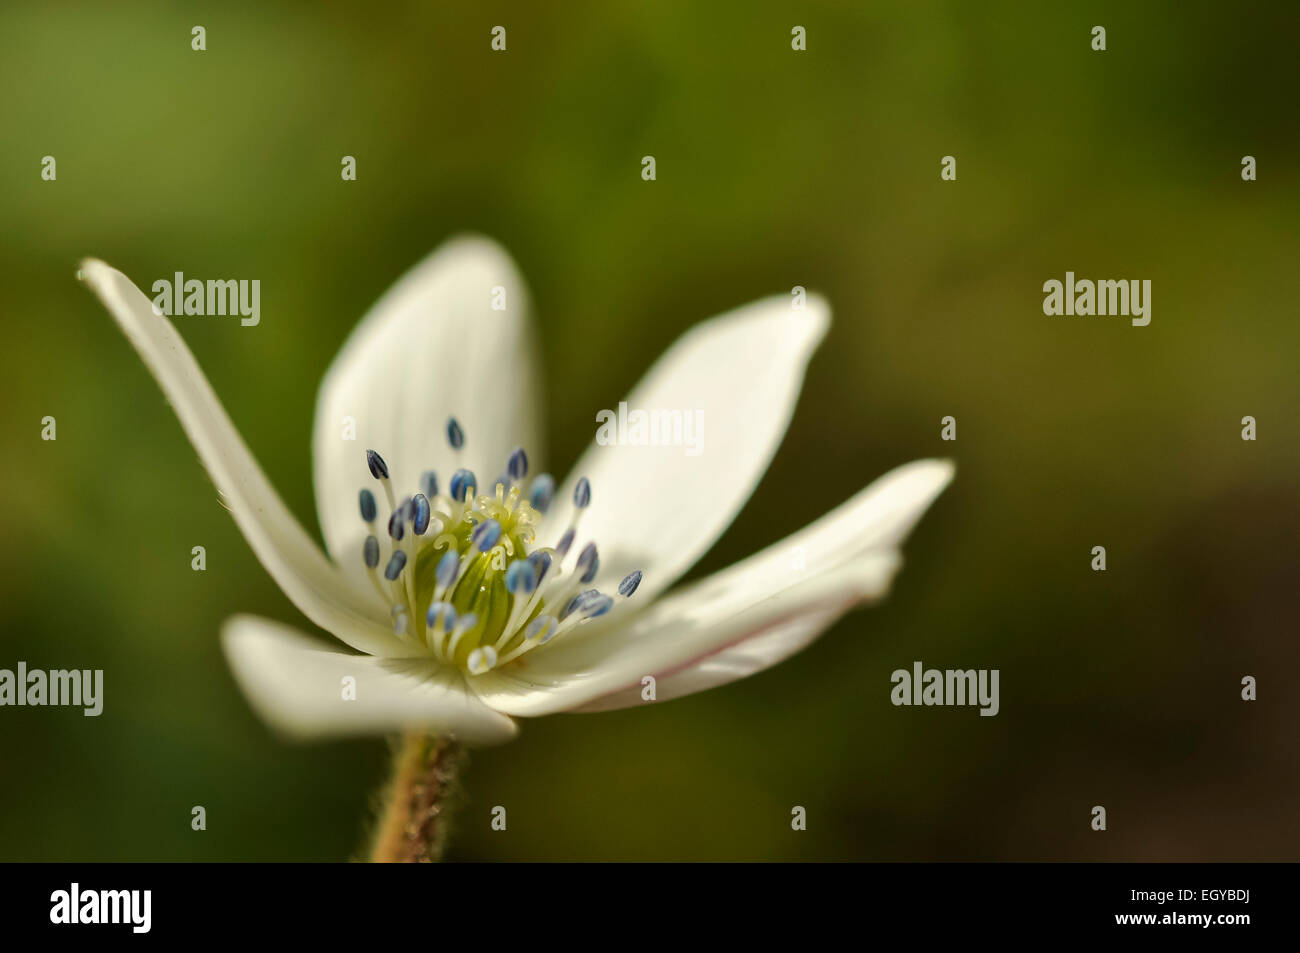 Anemone species with small white petals and blue anthers. Stock Photo